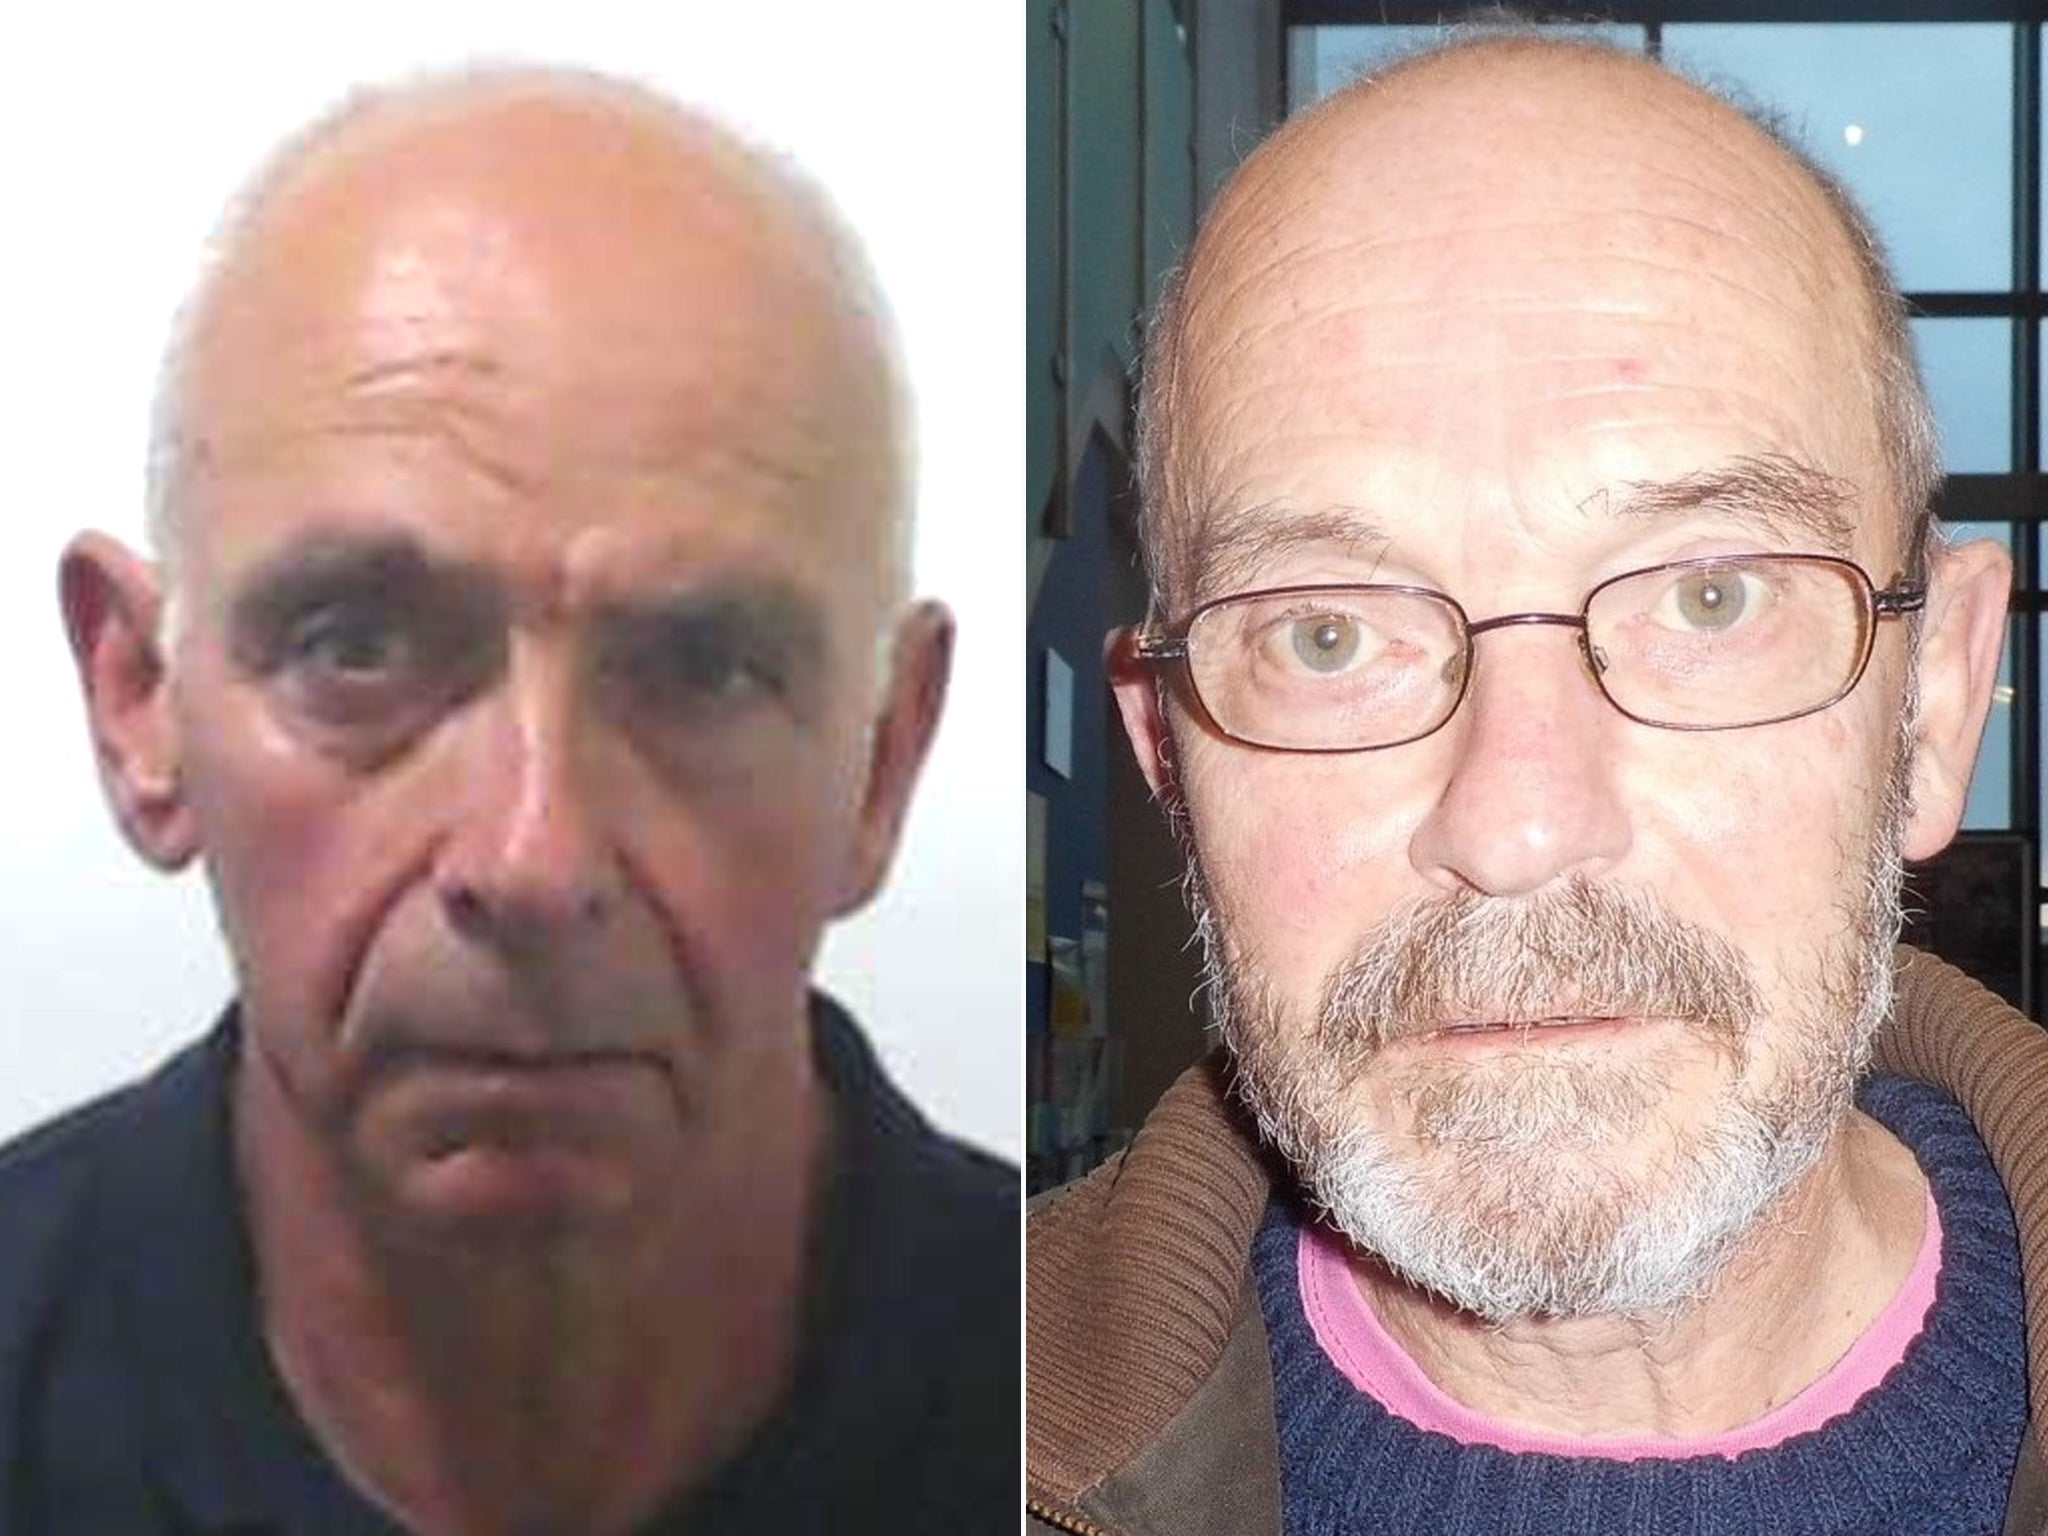 Jack Addis and Jeremy Laxton have both been jailed